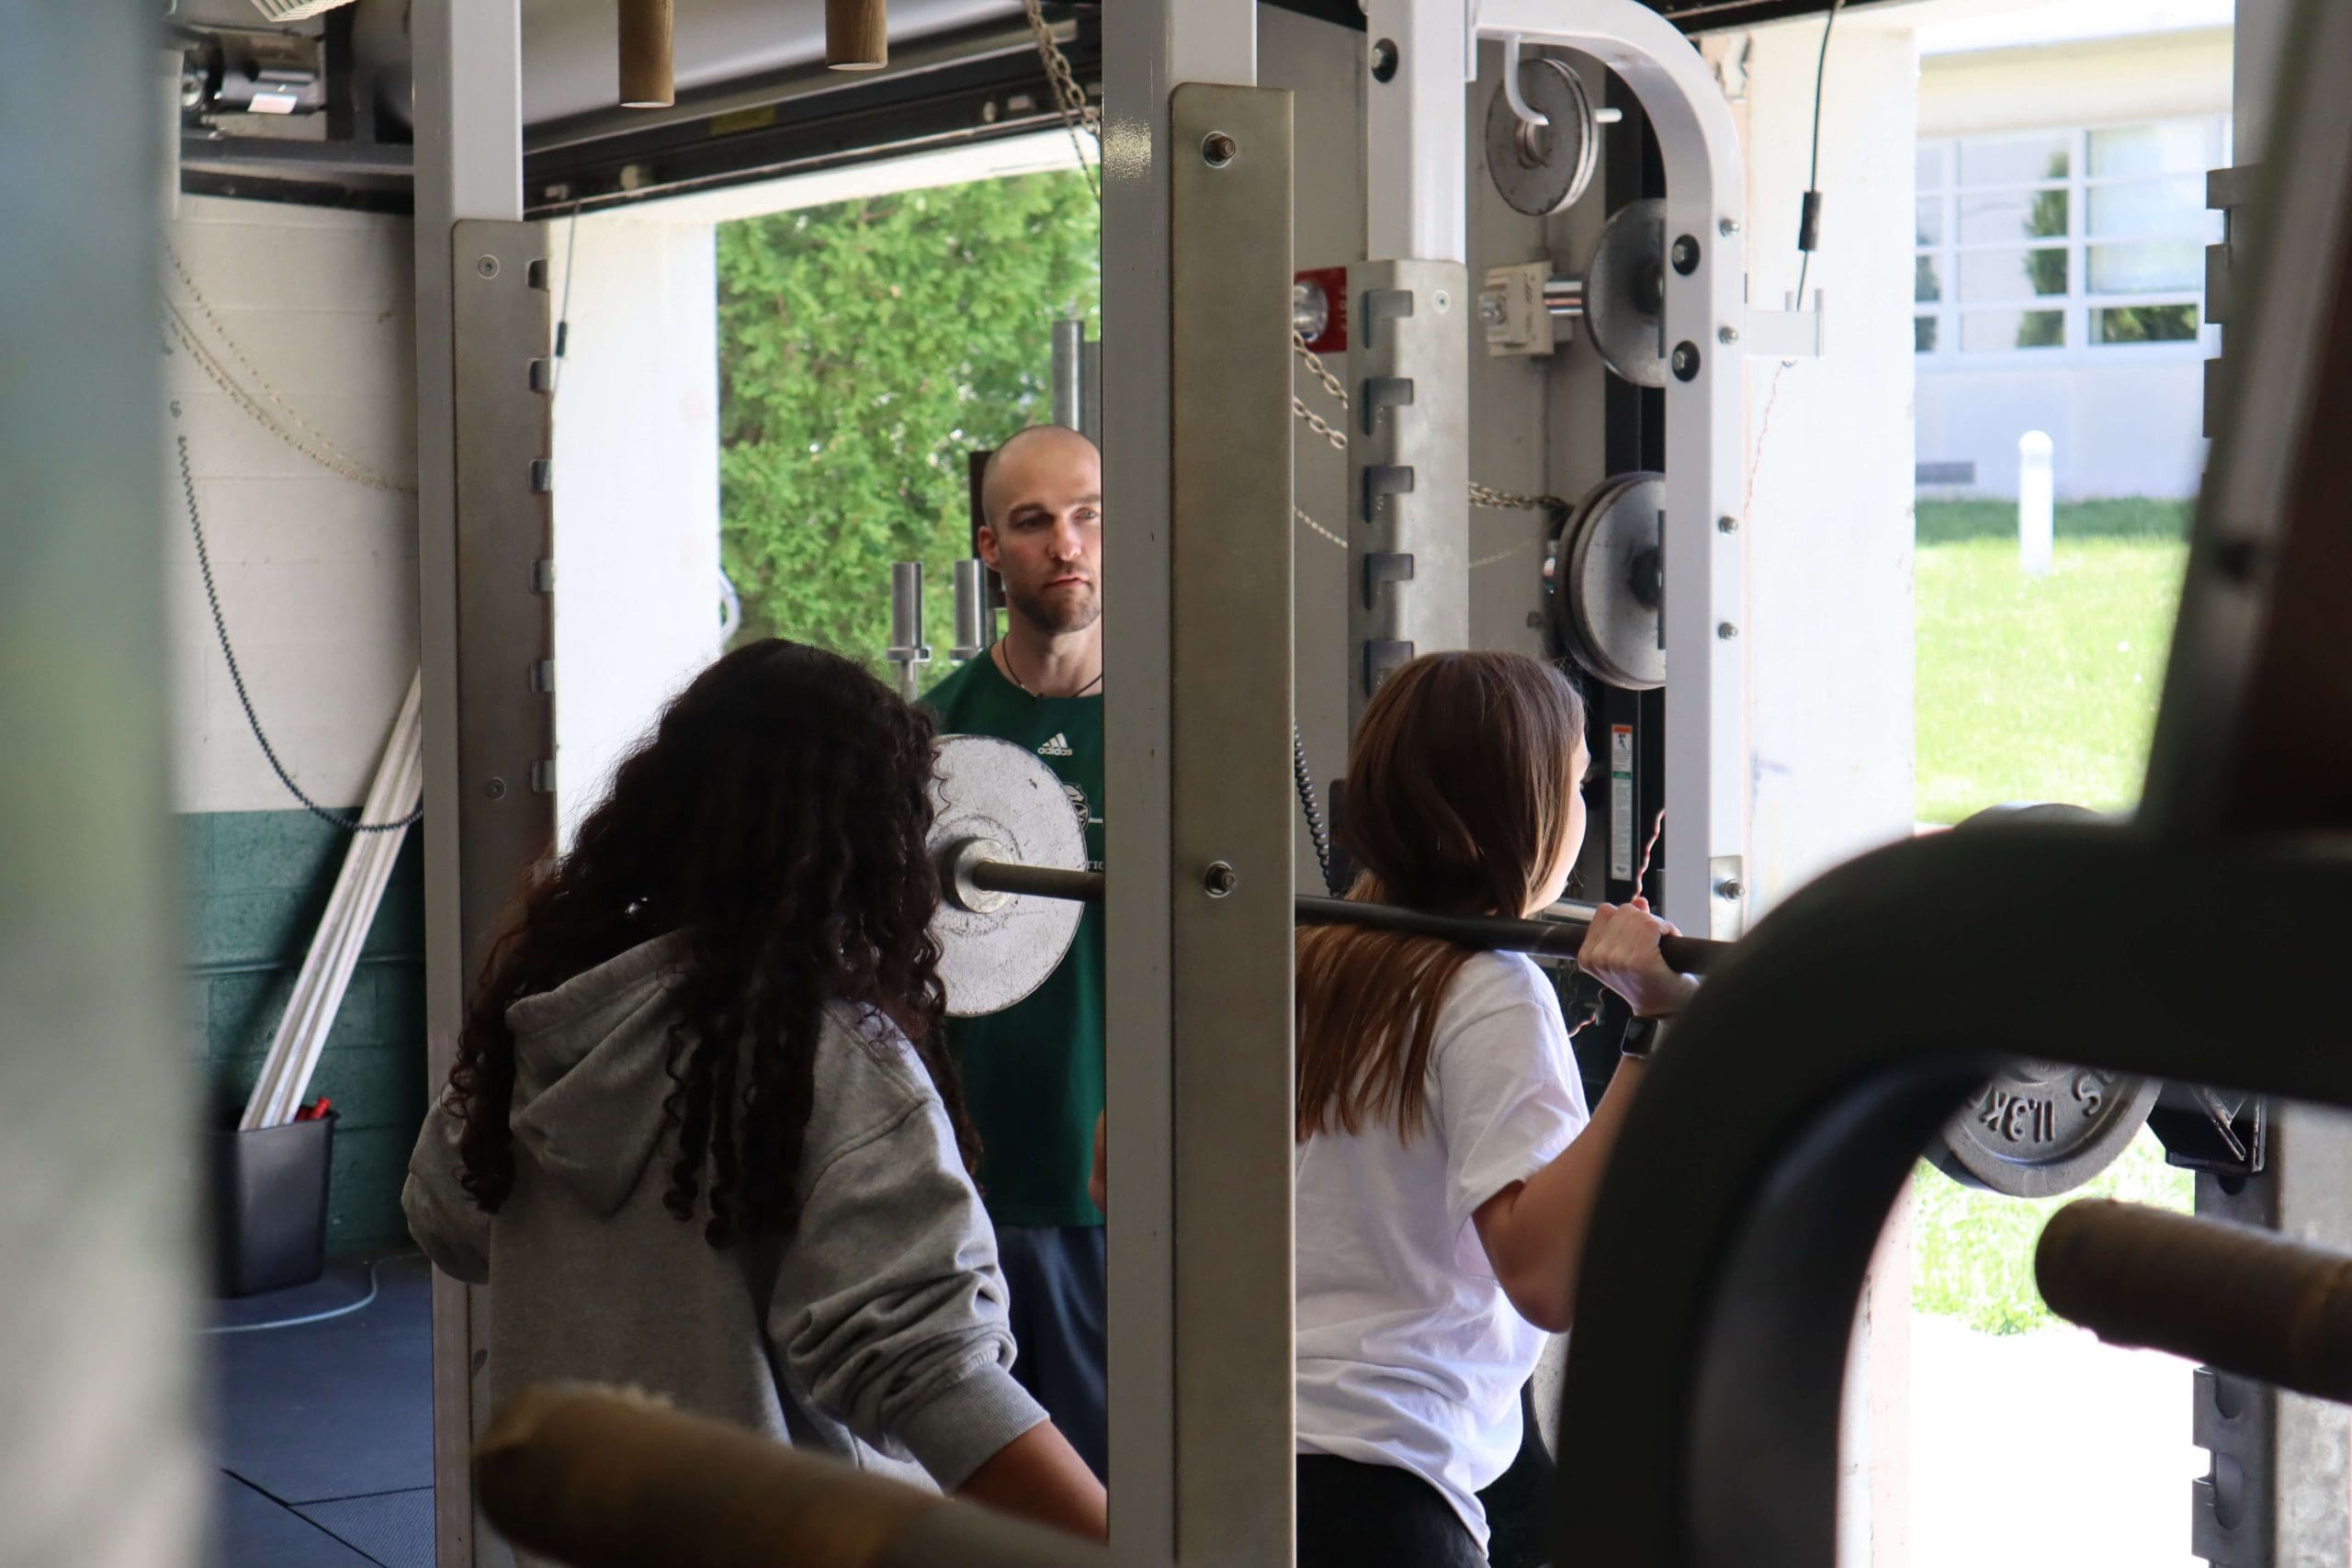 A teacher looks on as a student performs a barbell back squat.